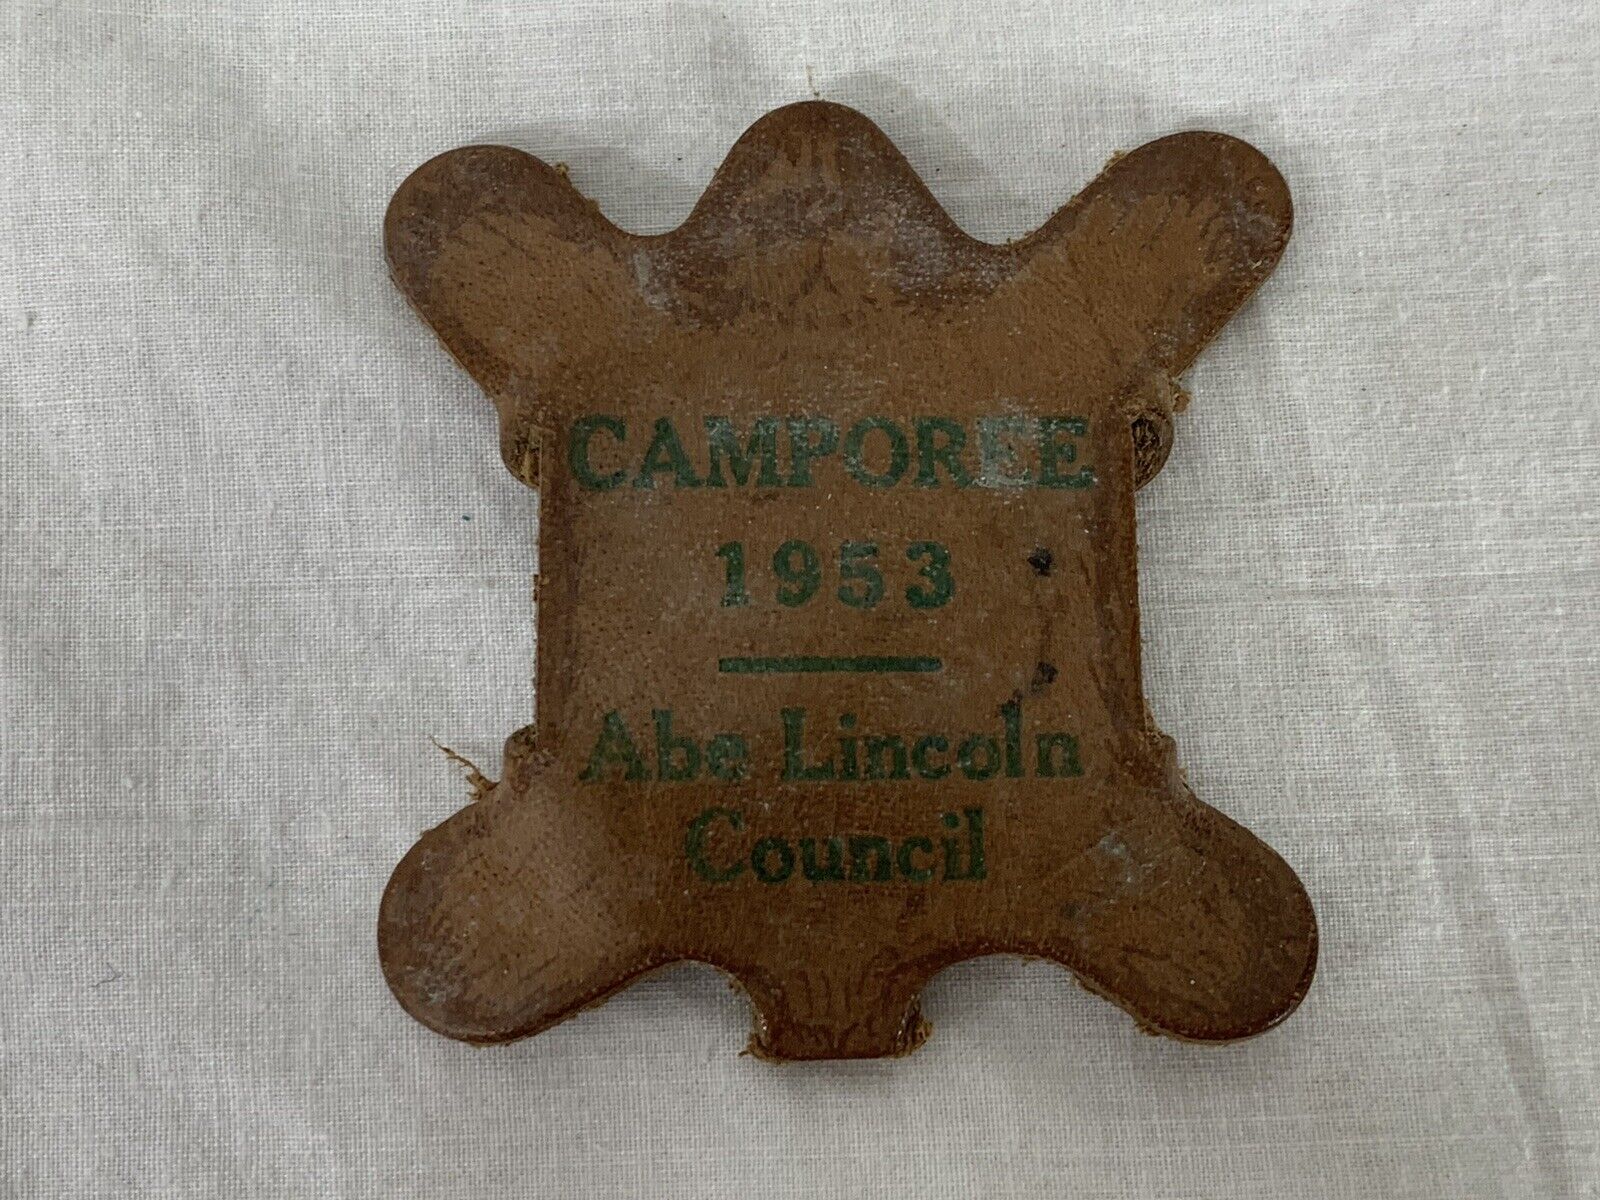 Vintage 1953 CAMPOREE ABE LINCOLN COUNCIL Leather Handkerchief Slide B.S.A.